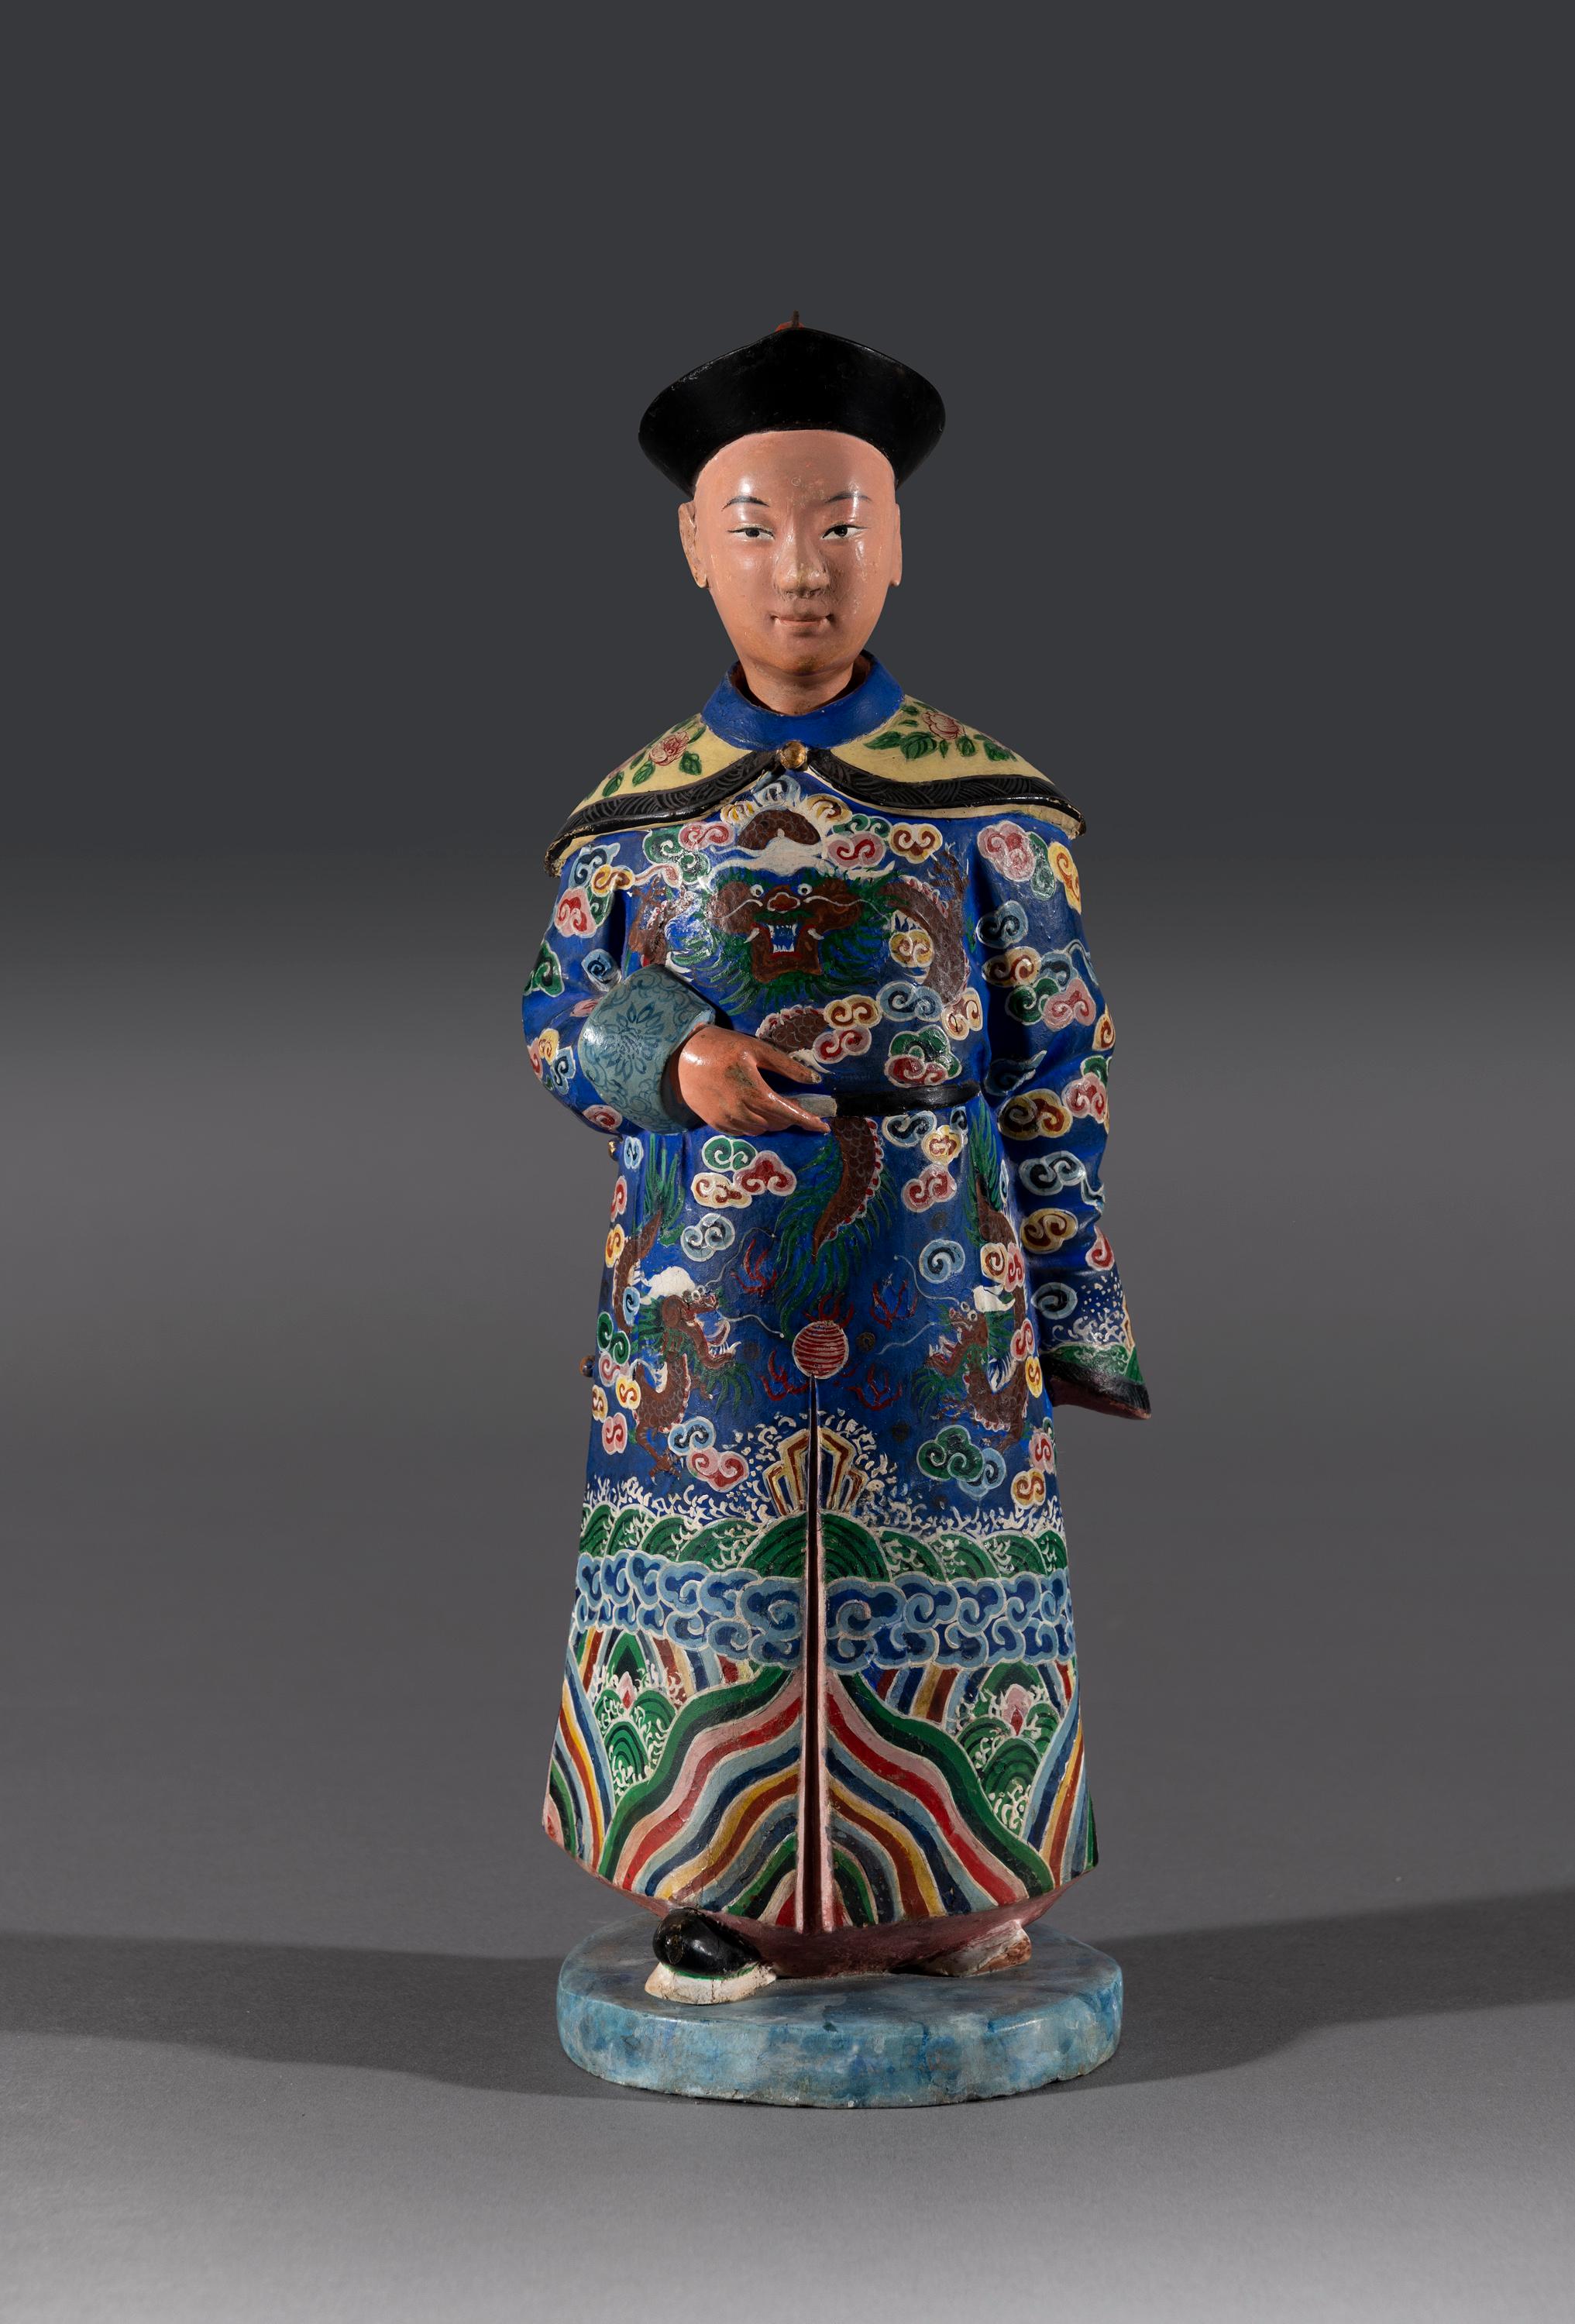 The clay figure of a Chinese man with nodding head in traditional dress from the 18th and 19th Centuries is beautifully hand painted and still retains the original colors and finish. Figurines such as this are rare and often referred to as ‘Chinese